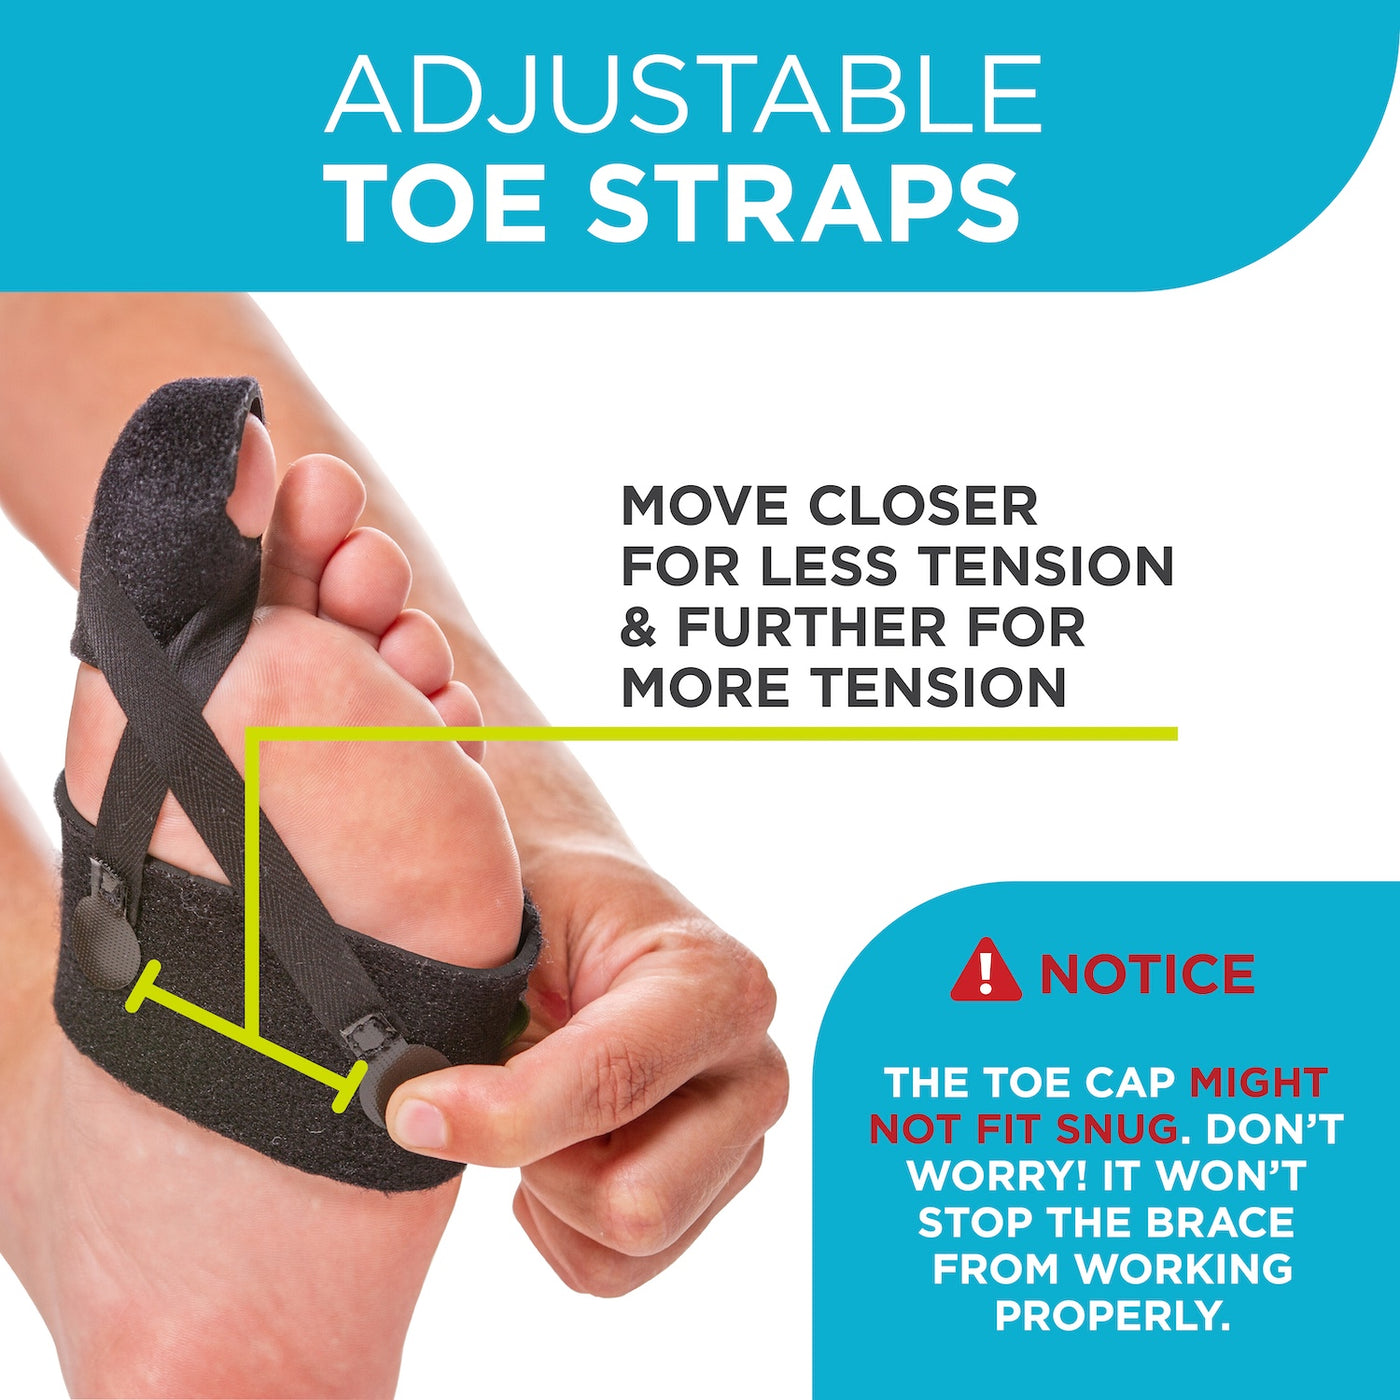 Adjustable turf toe straps allow for more or less tension on toe